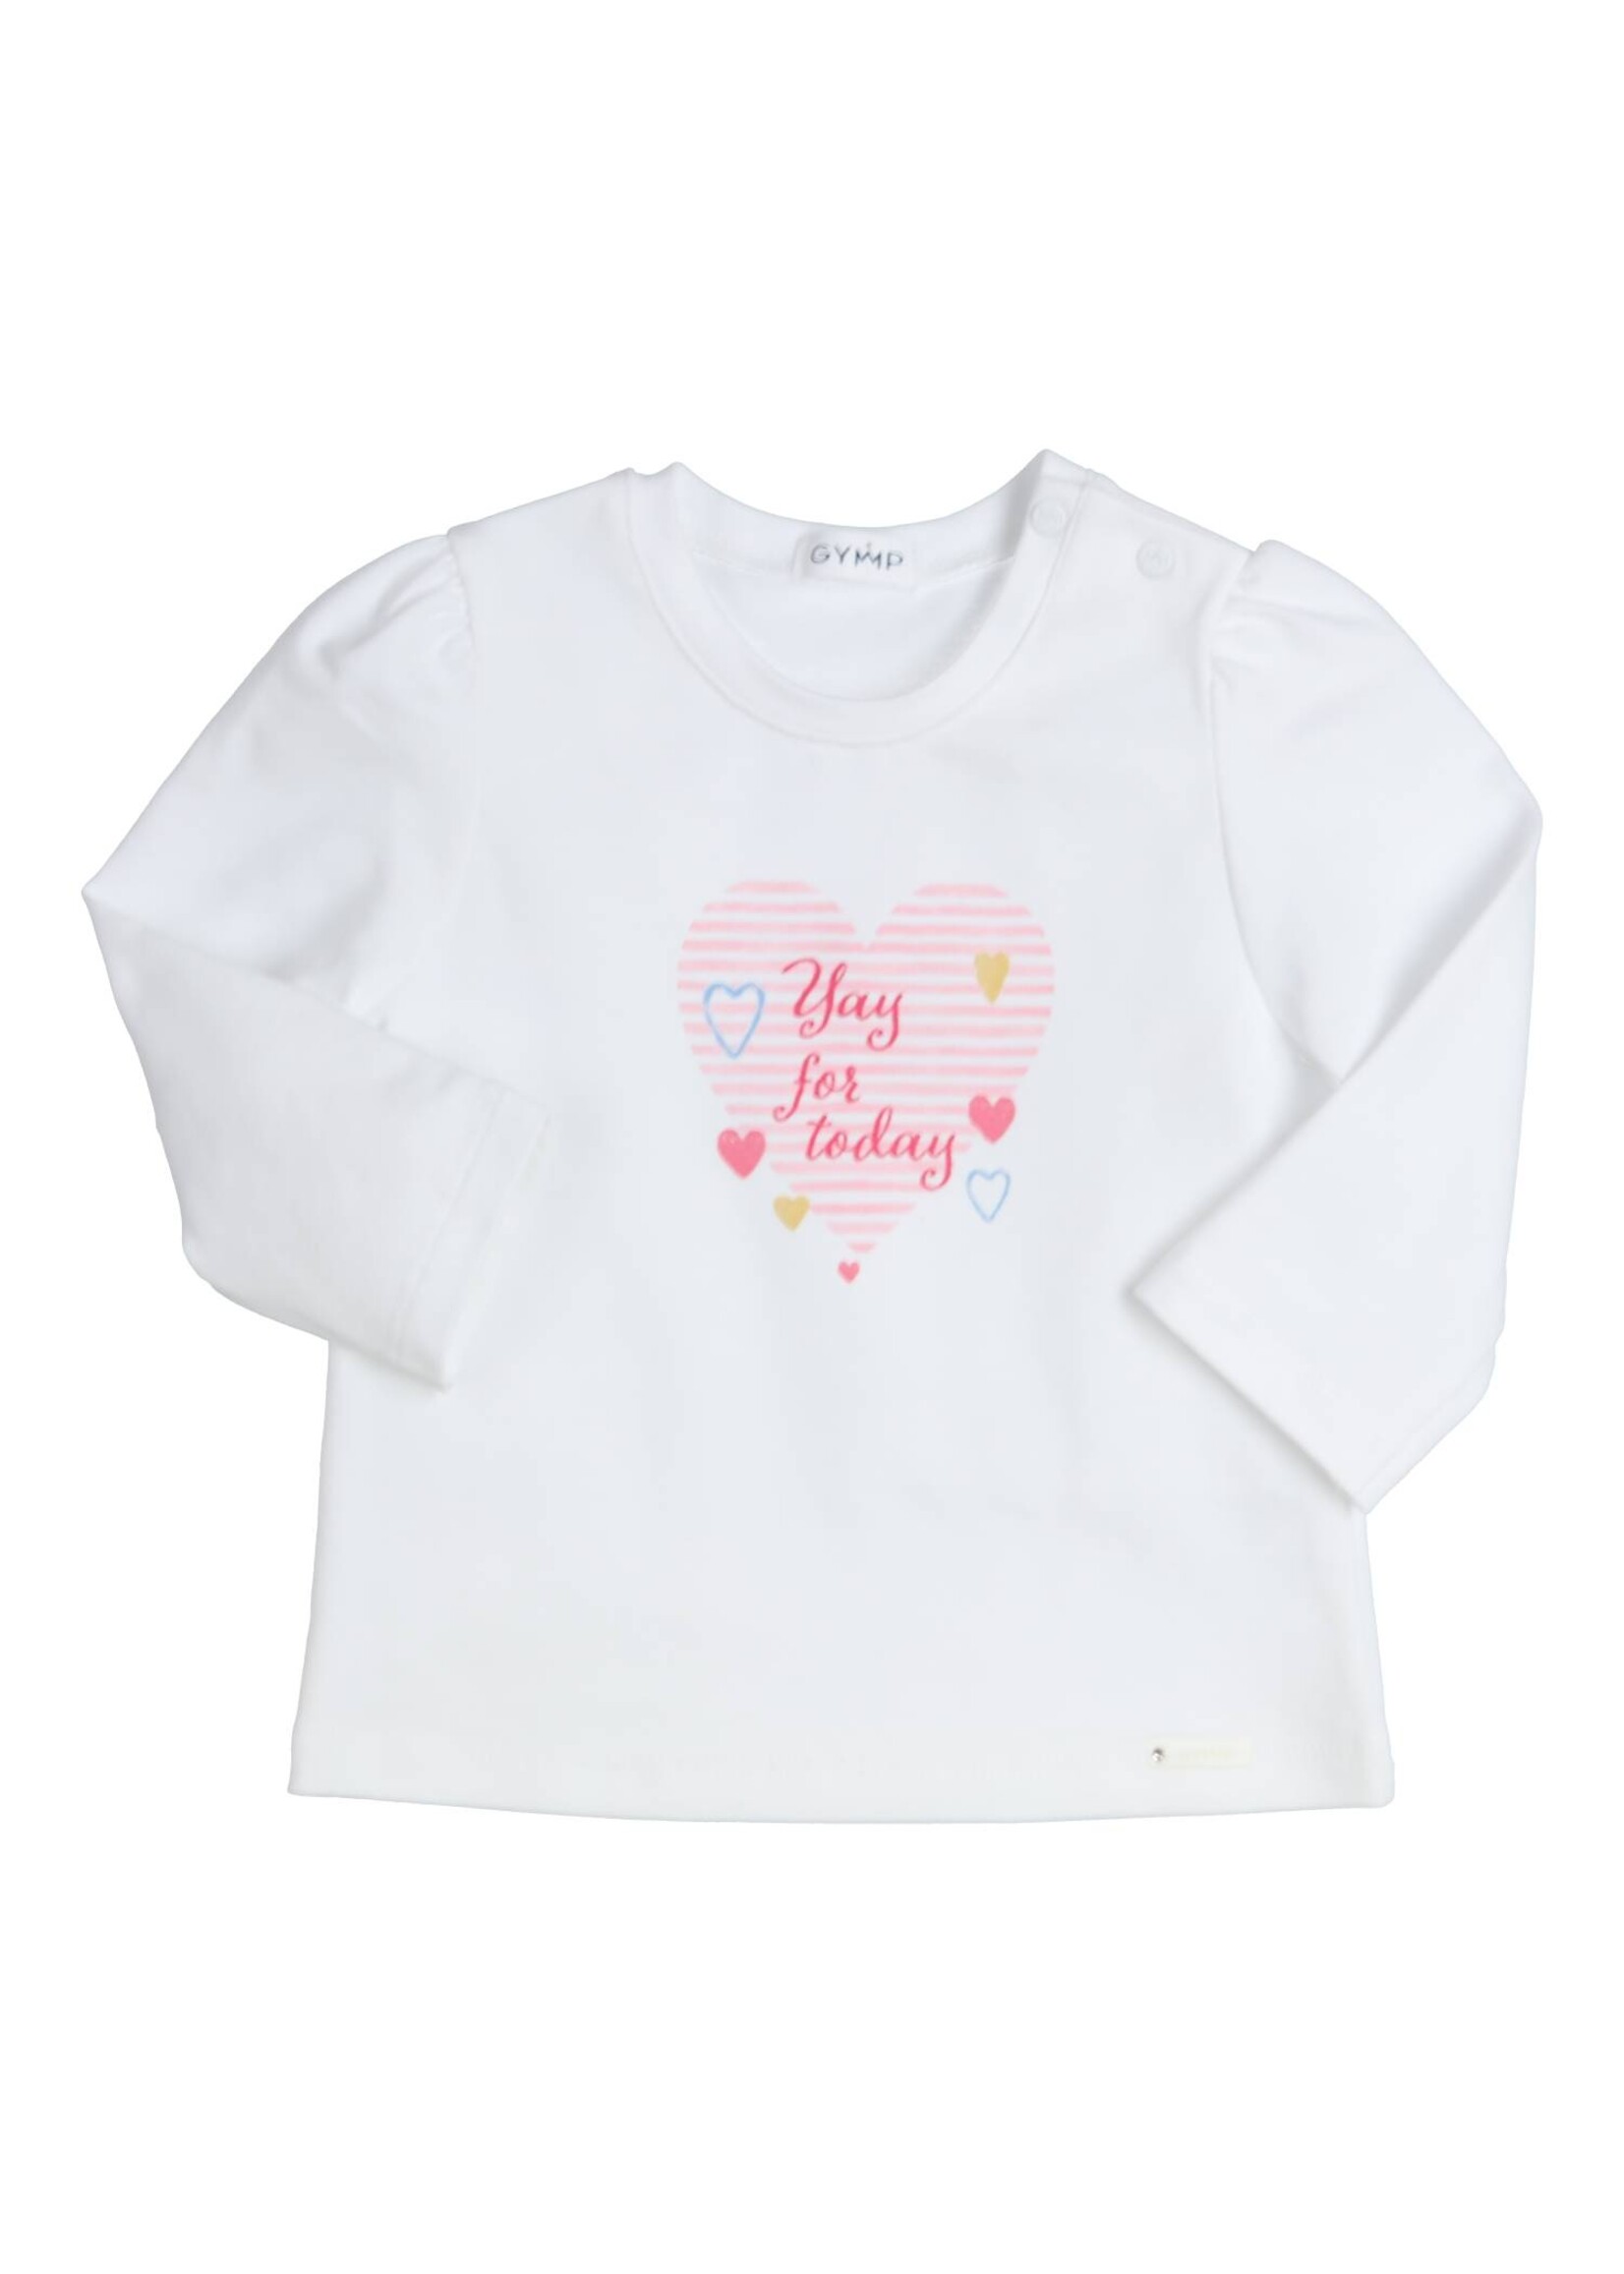 Gymp Girls Longsleeve Aerobic Yay for today 352-4259-10 White